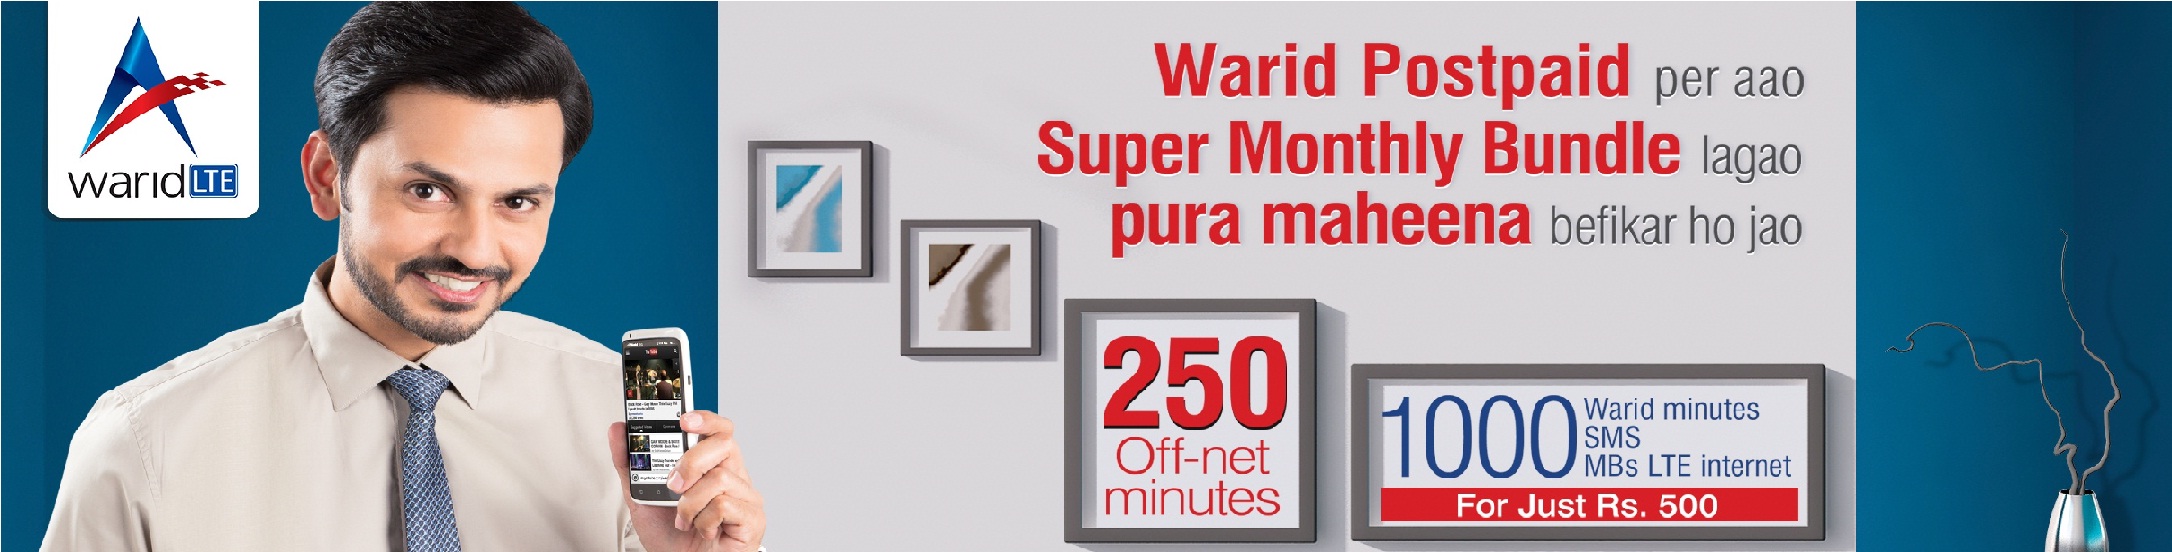 Warid Postpaid Super Monthly Bundle Offer For New Customers